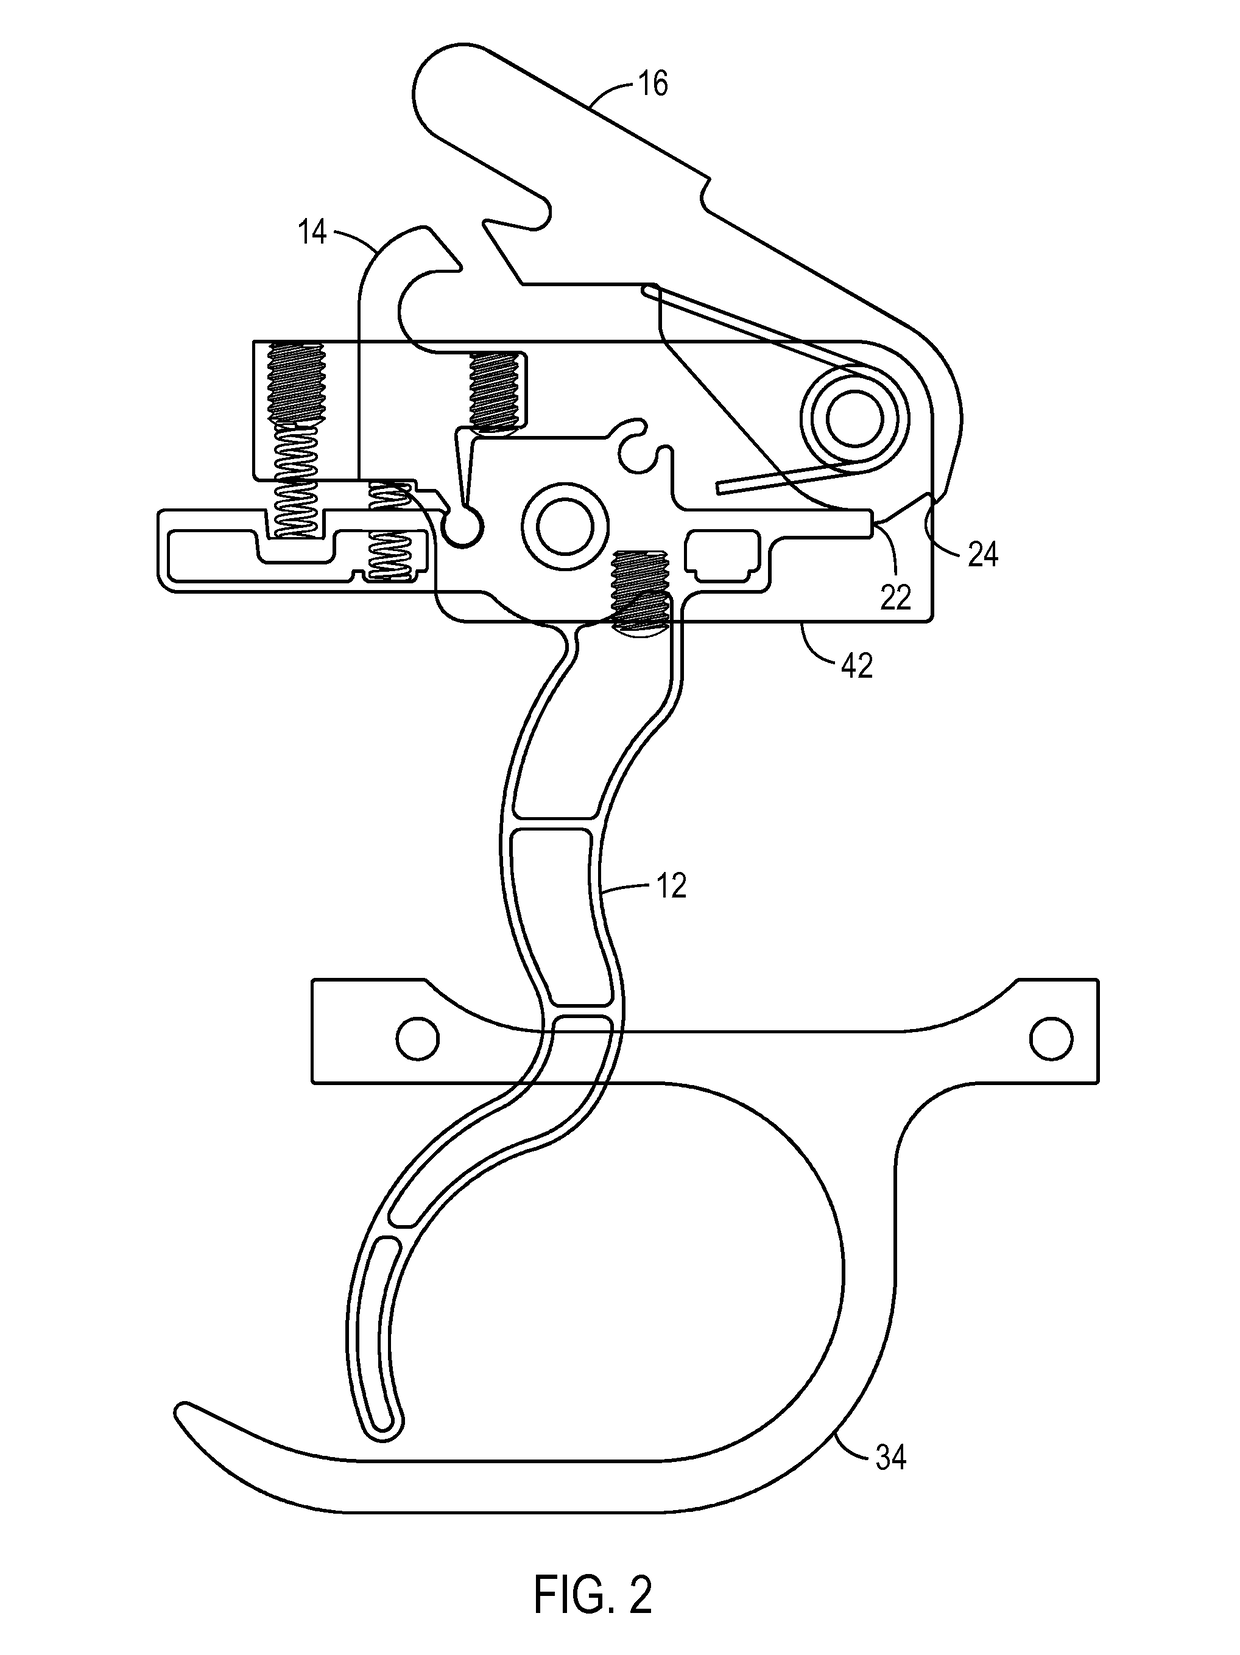 Drop in trigger assembly